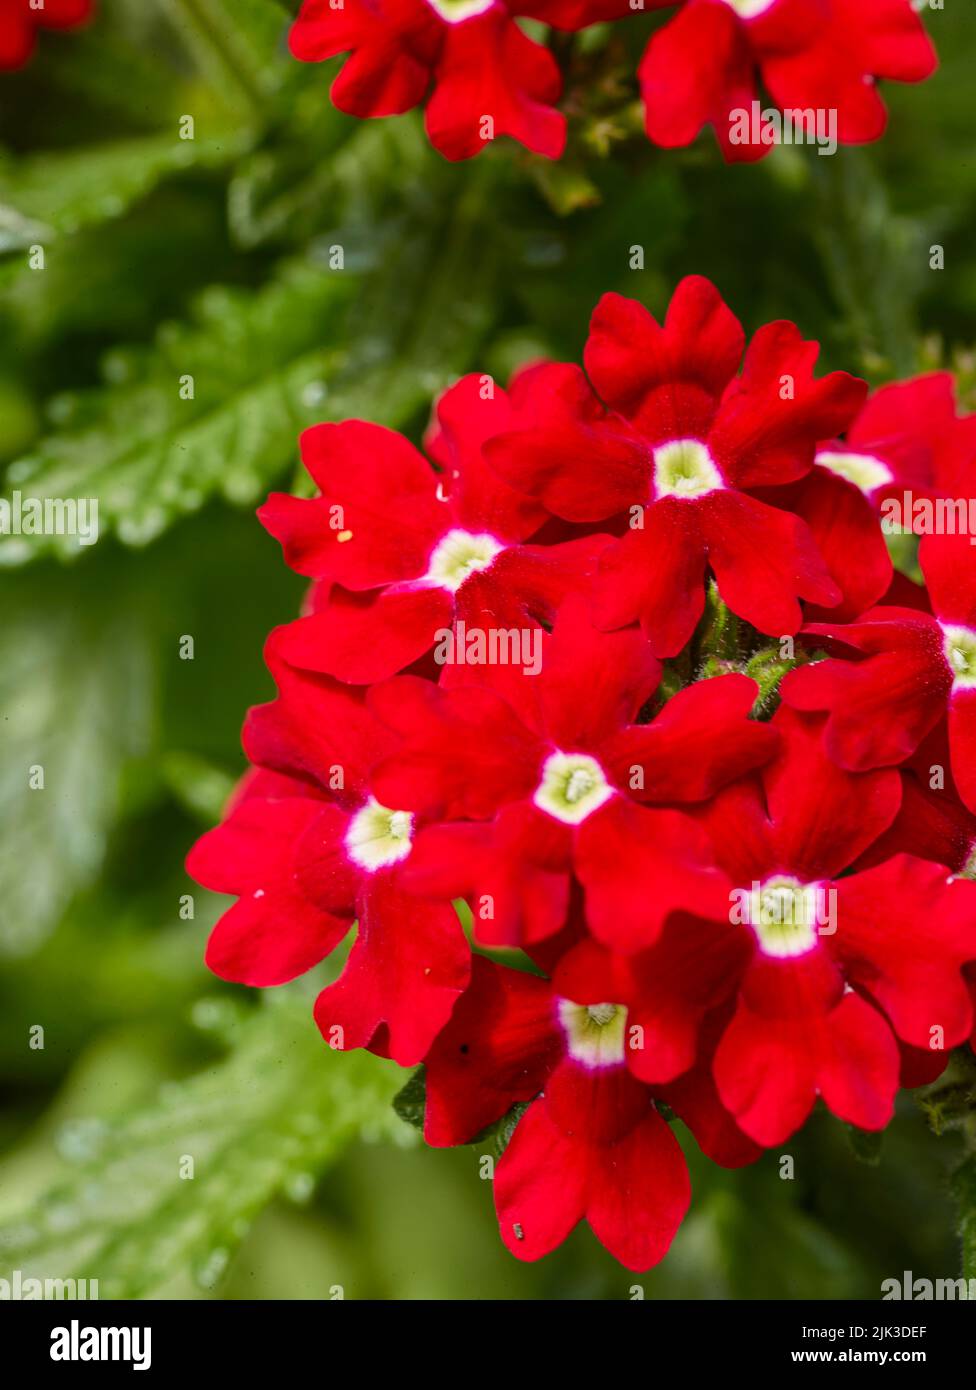 Delightful Verbena showboat red with eye, vervain Quartz Series, Verbena ‘Bunting'. Natural close-up plant portrait Stock Photo